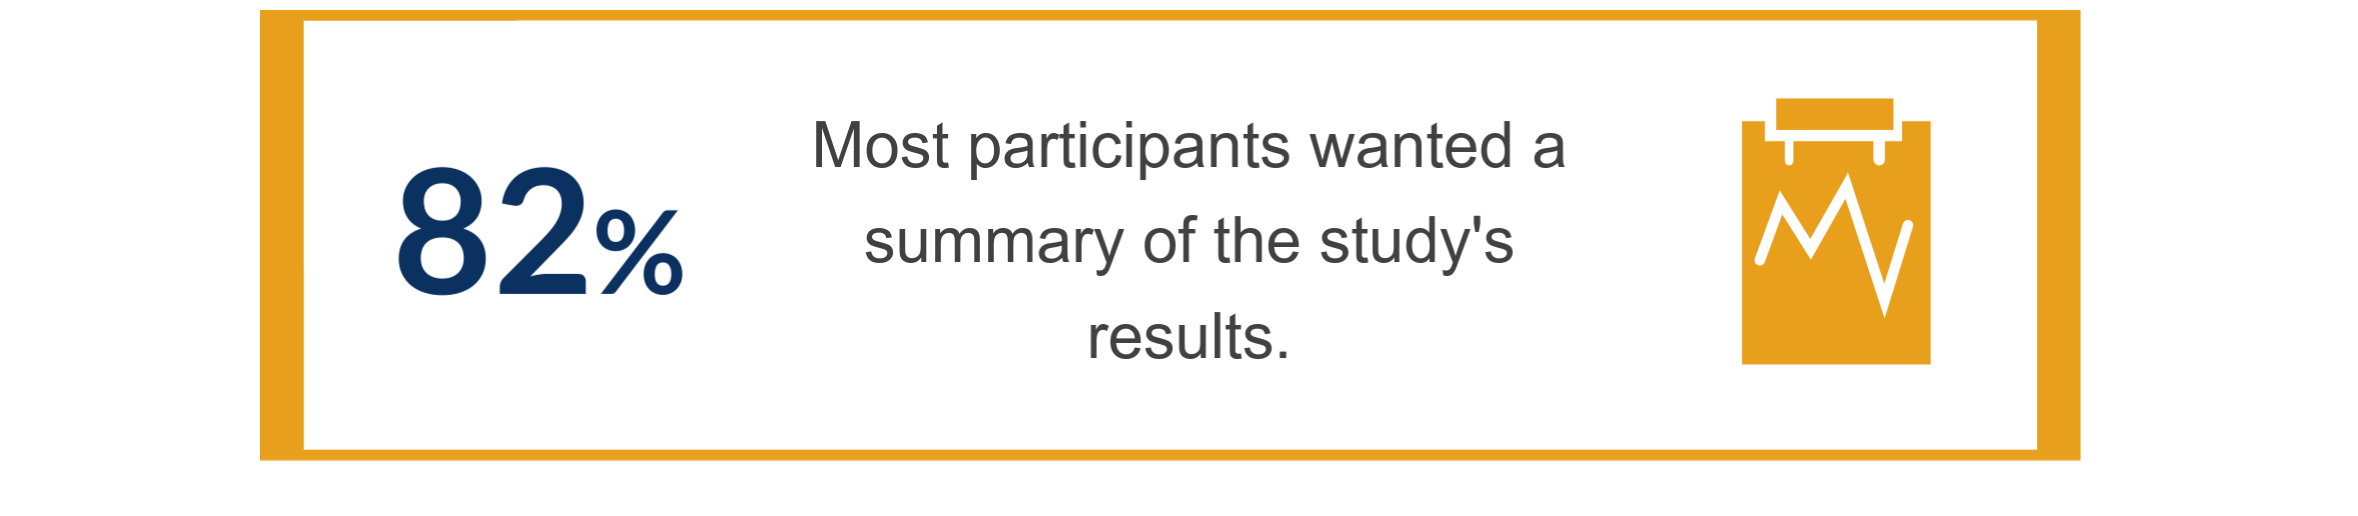 82%, or most participants, wanted a summary of the study's results.